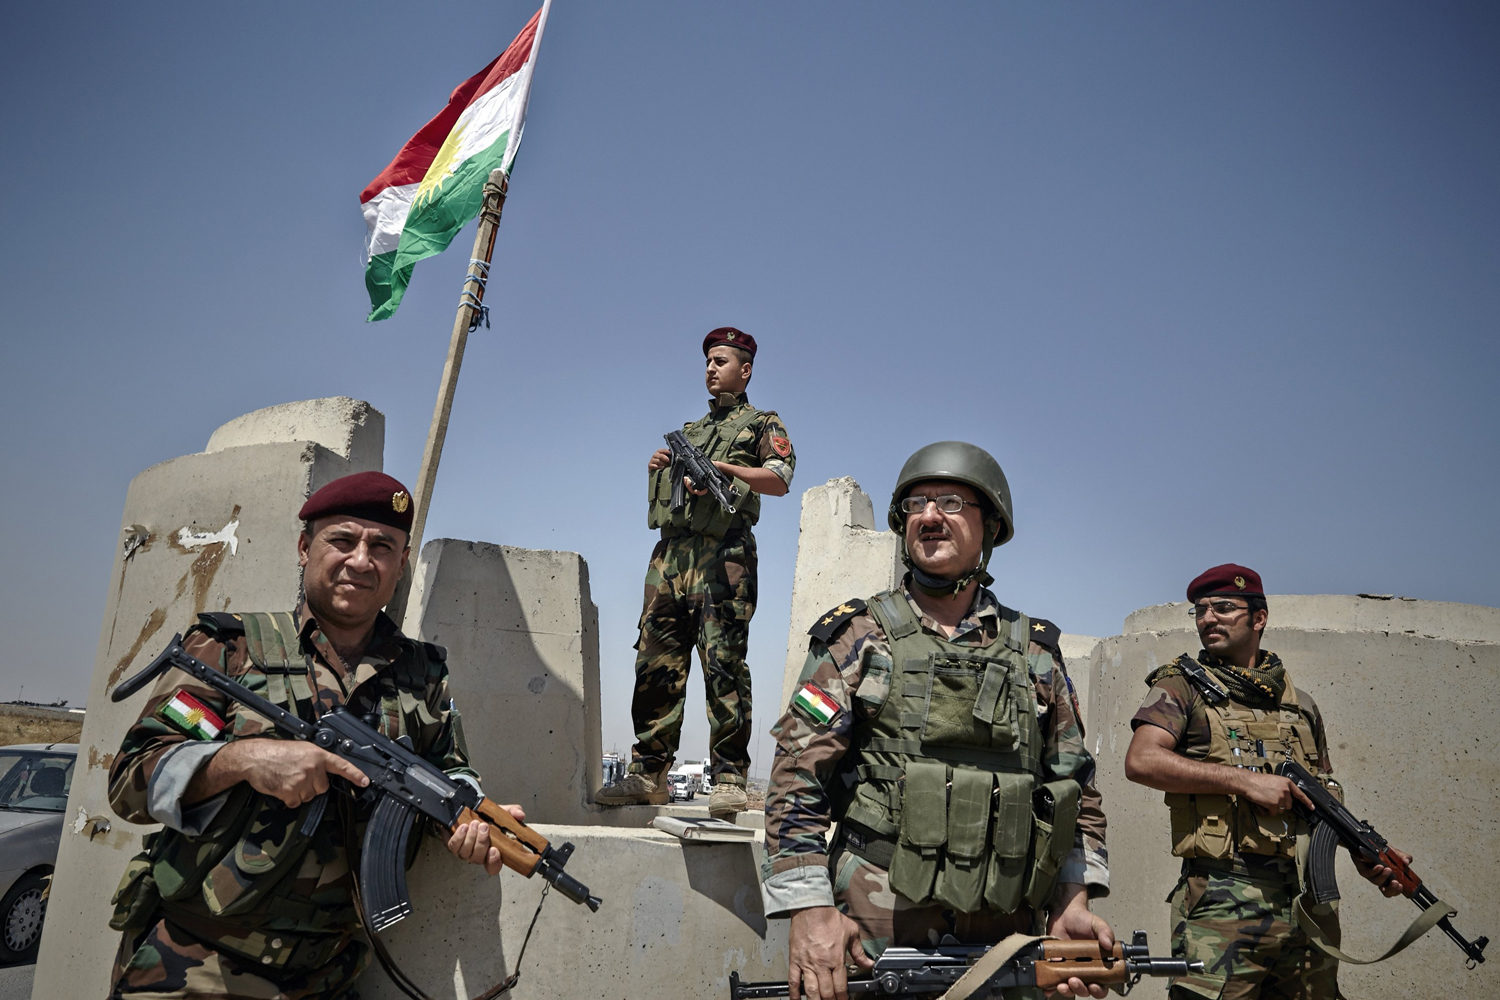 Peshmerga fighters provide security at the last checkpoint outside of Mosul which is currently under control of ISIS militants, on June 14 in Mosul.